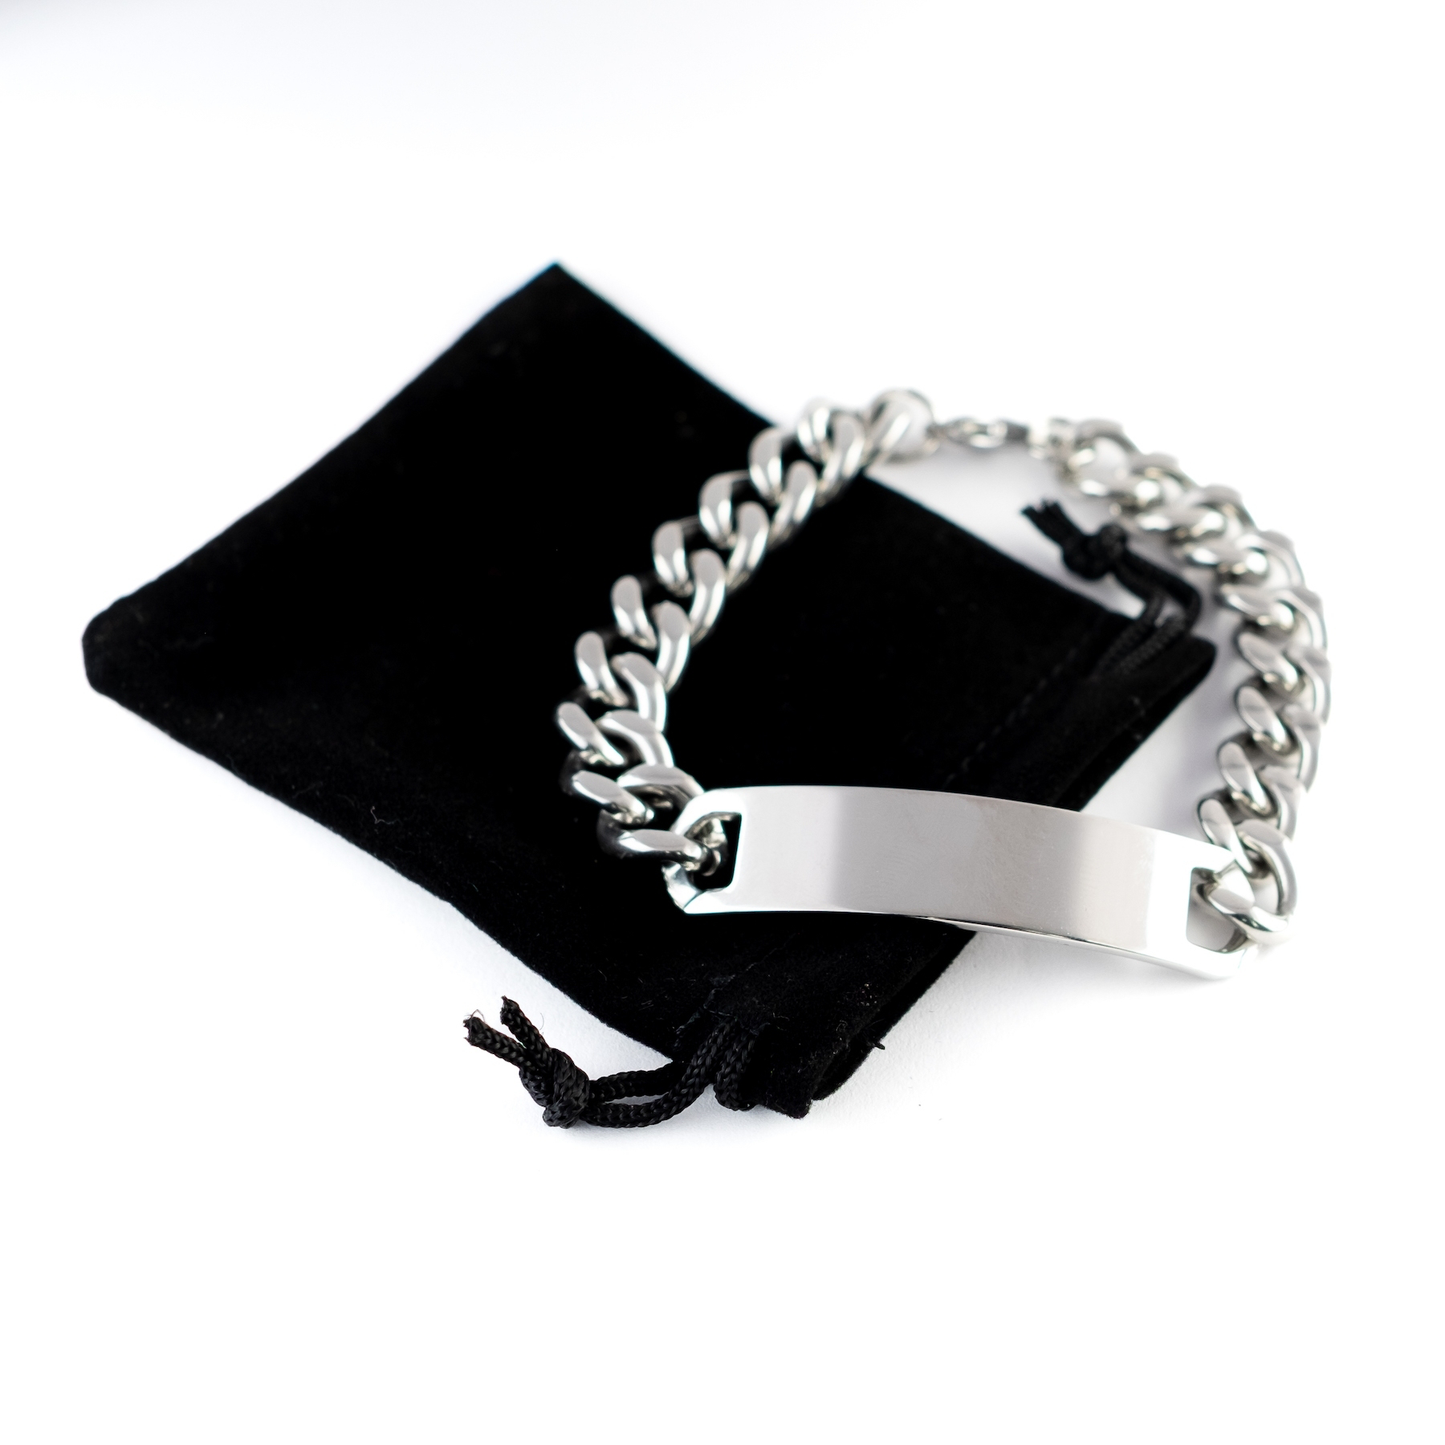 To My Mamma Thank You Gifts, You are appreciated more than you know, Appreciation Cuban Chain Stainless Steel Bracelet for Mamma, Birthday Unique Gifts for Mamma